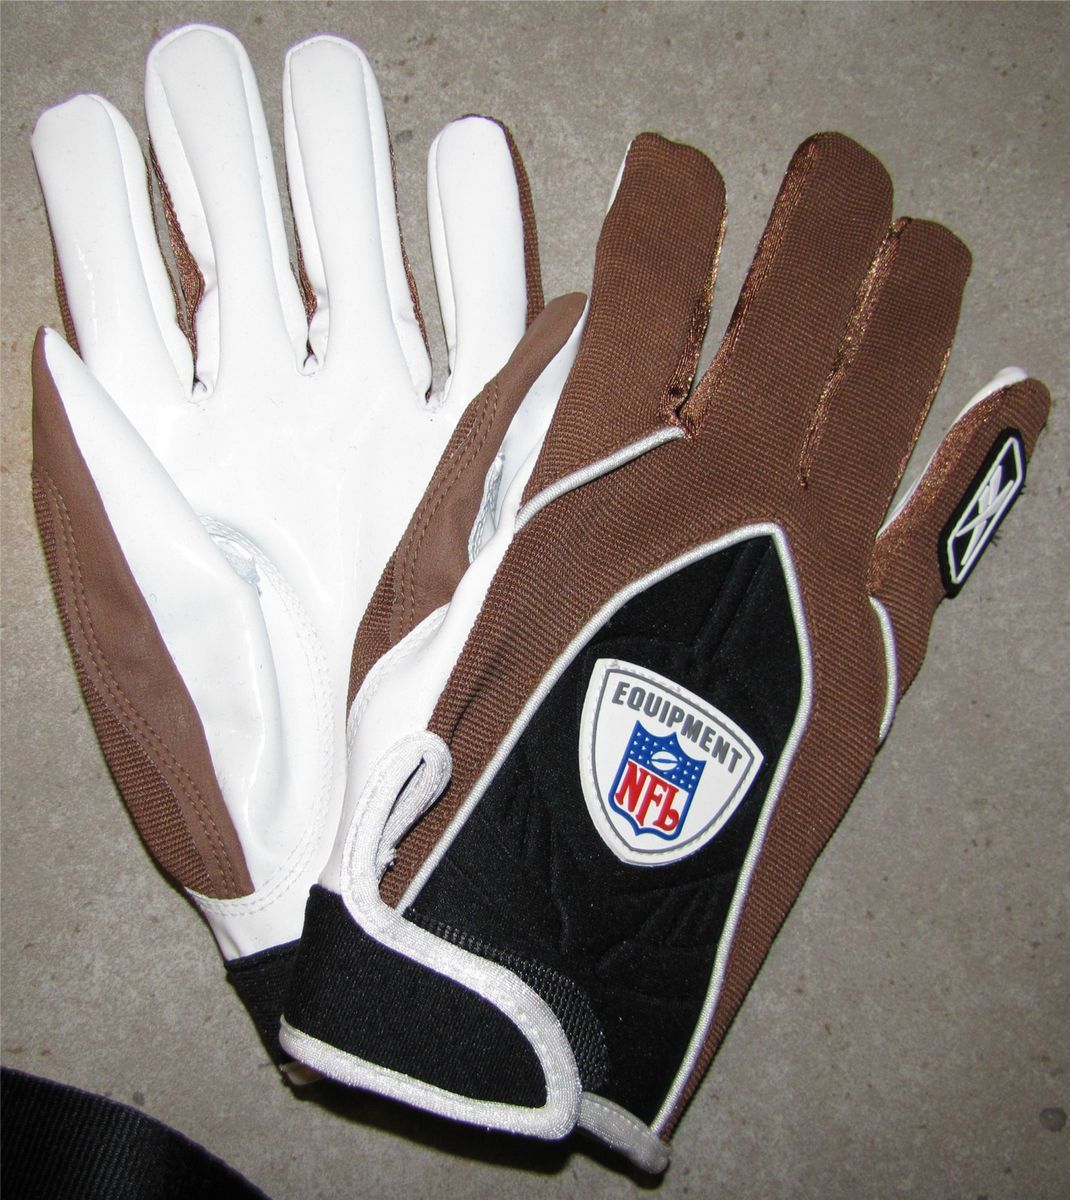 NFL Football Gloves   Brown (VERY RARE)   Cleveland Browns   HAND MOLD